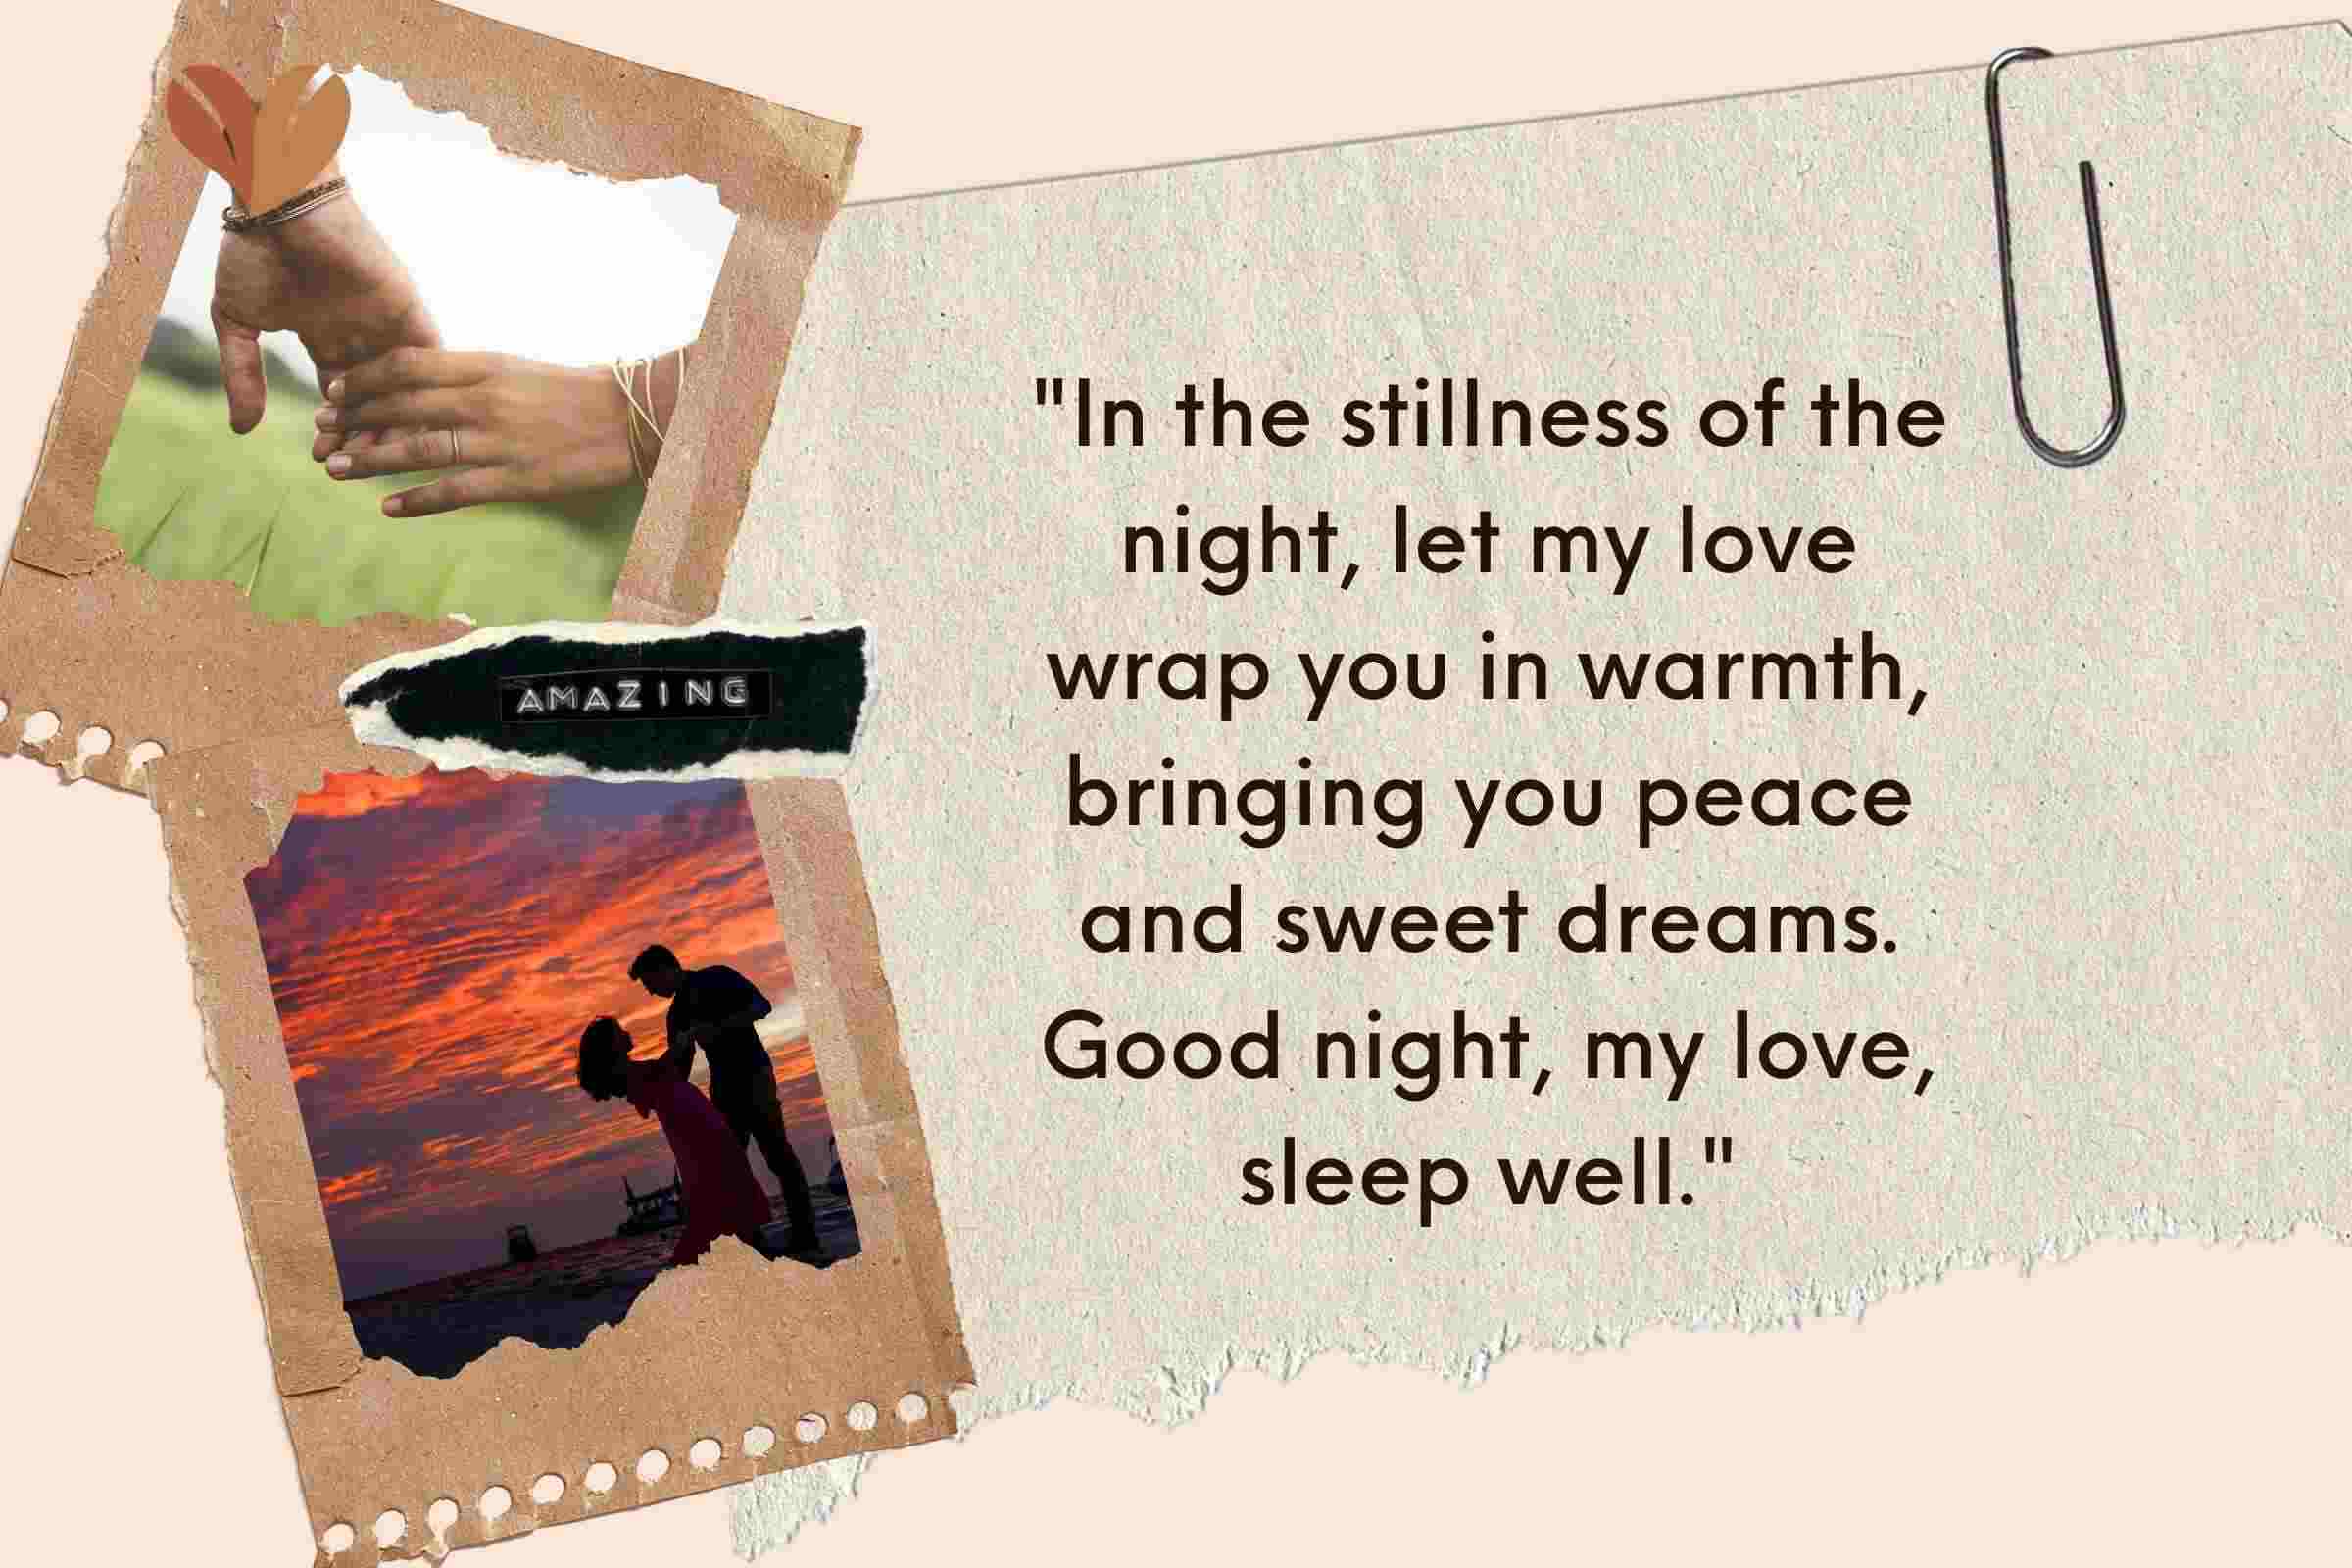 "In the stillness of the night, let my love wrap you in warmth, bringing you peace and sweet dreams. Good night, my love, sleep well."